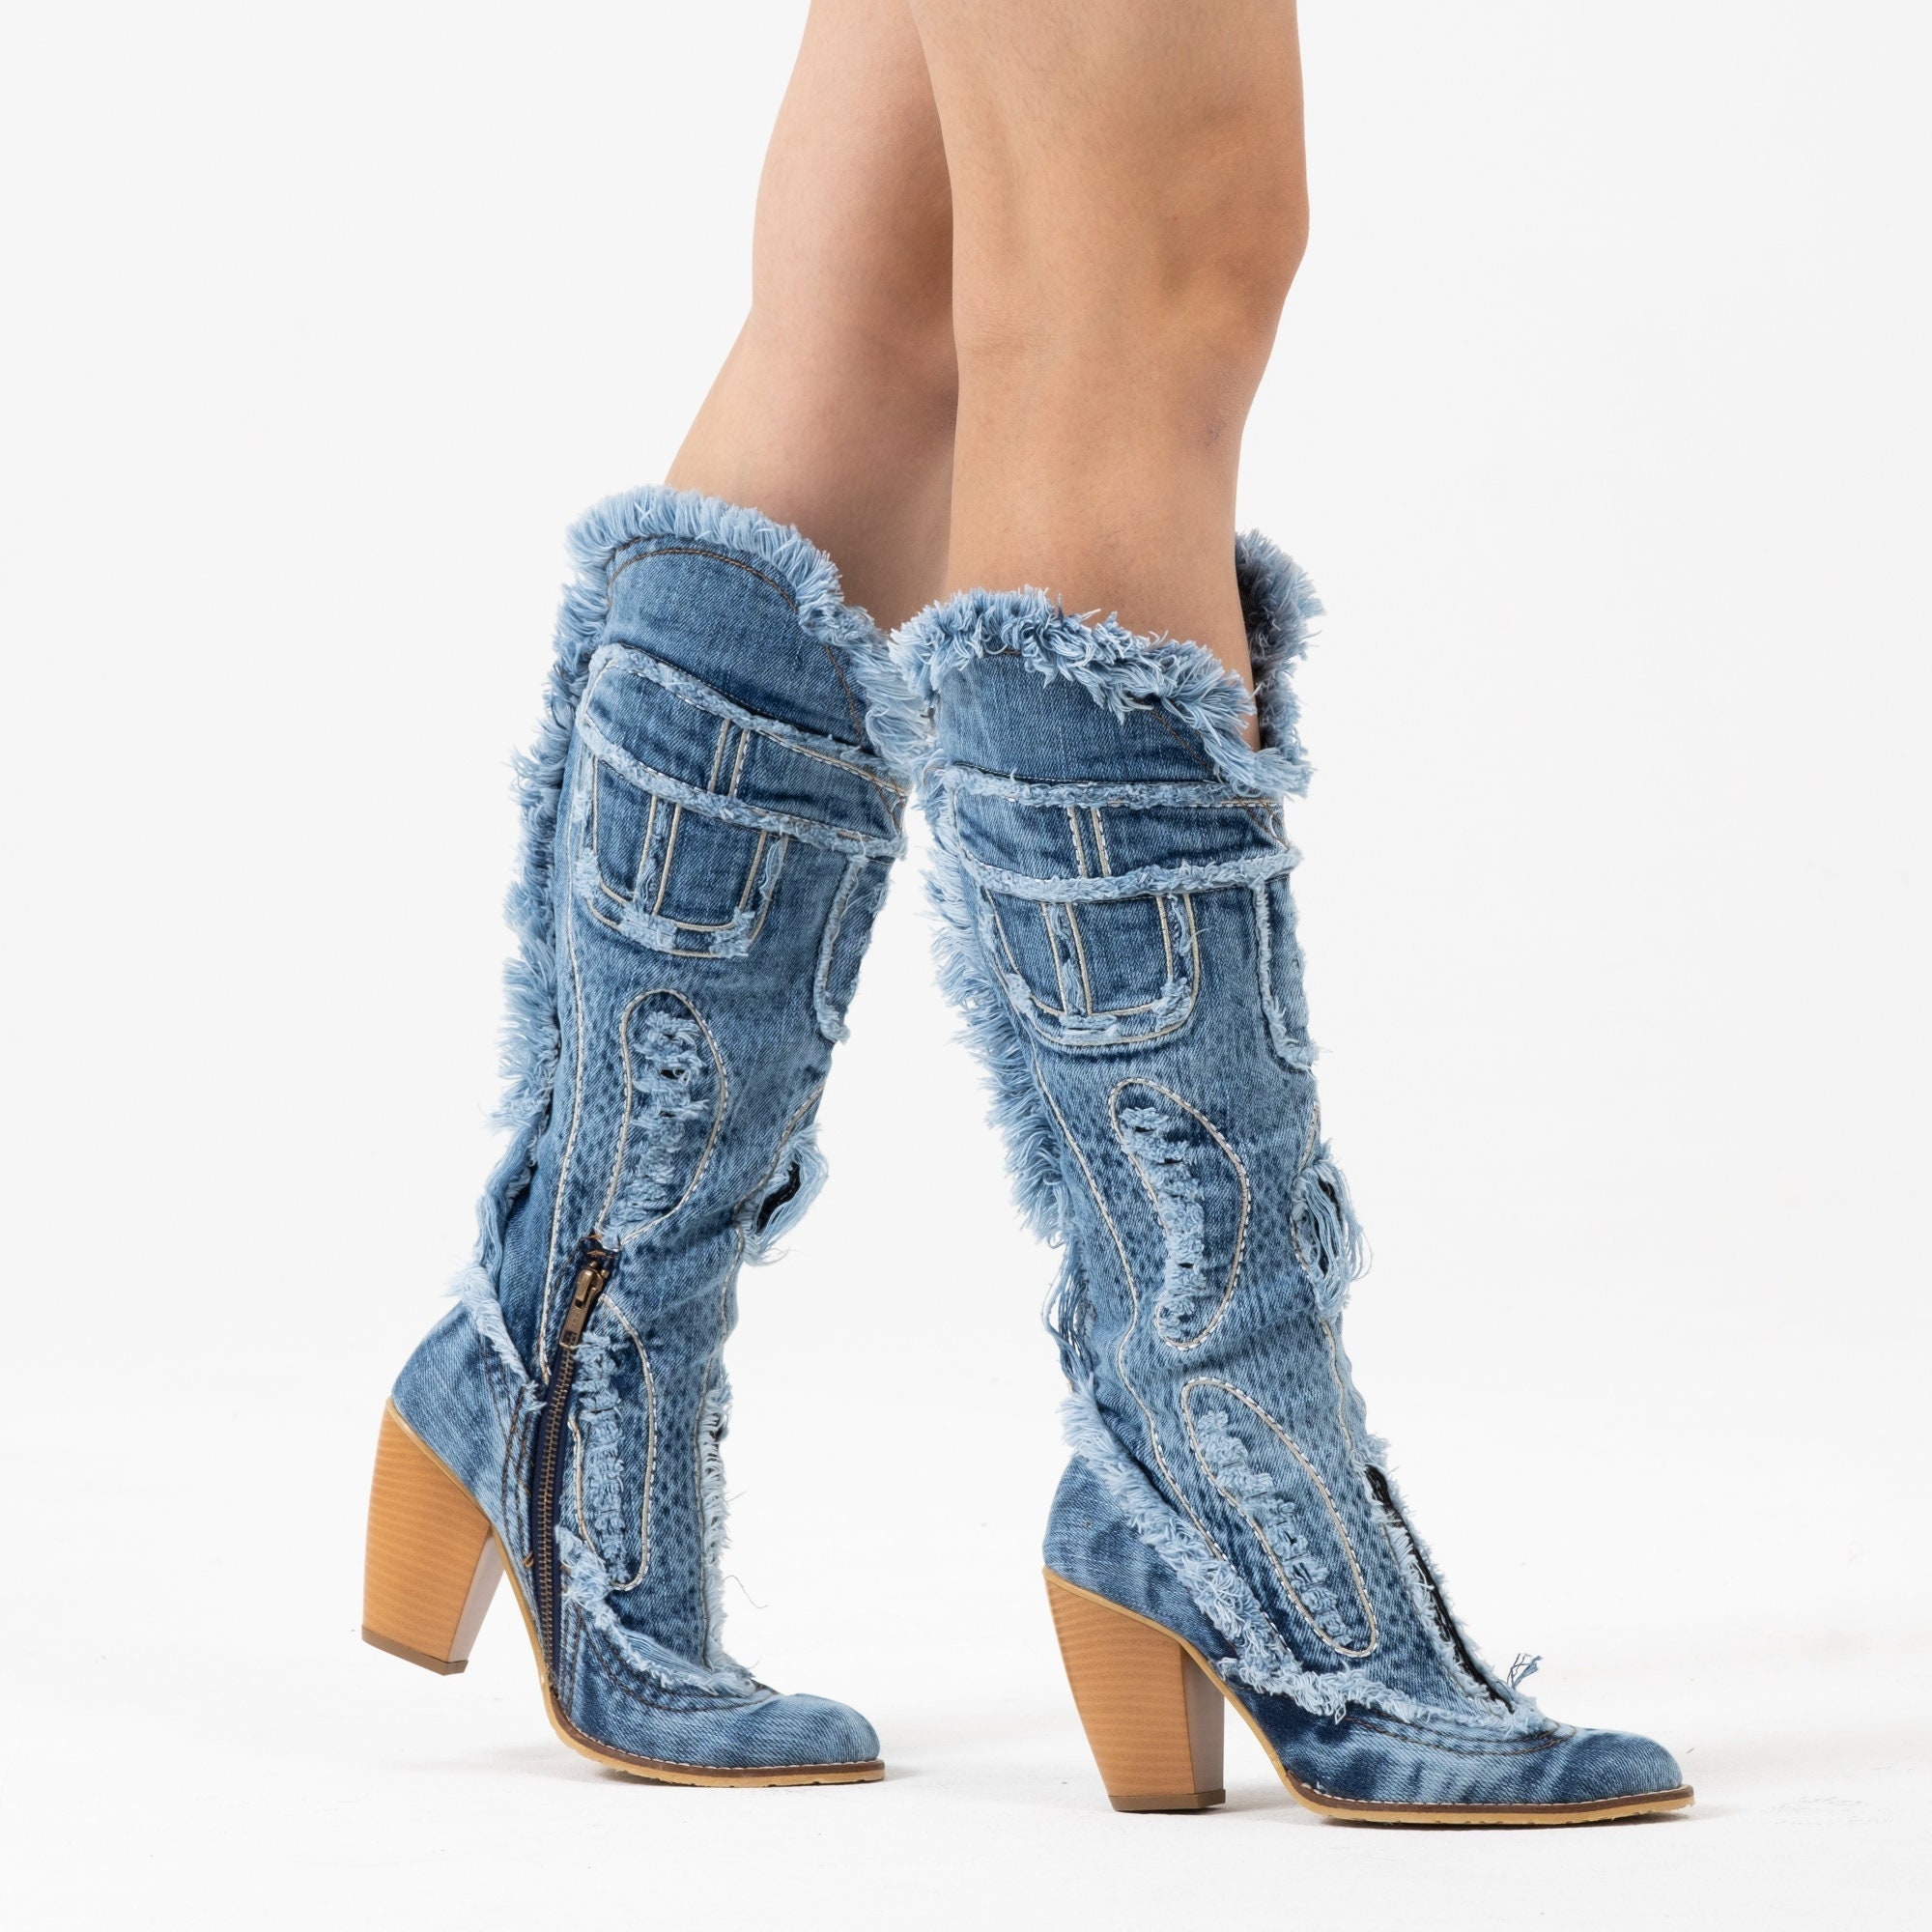 Do people prefer wearing boots with their jeans tucked in or out? - Quora